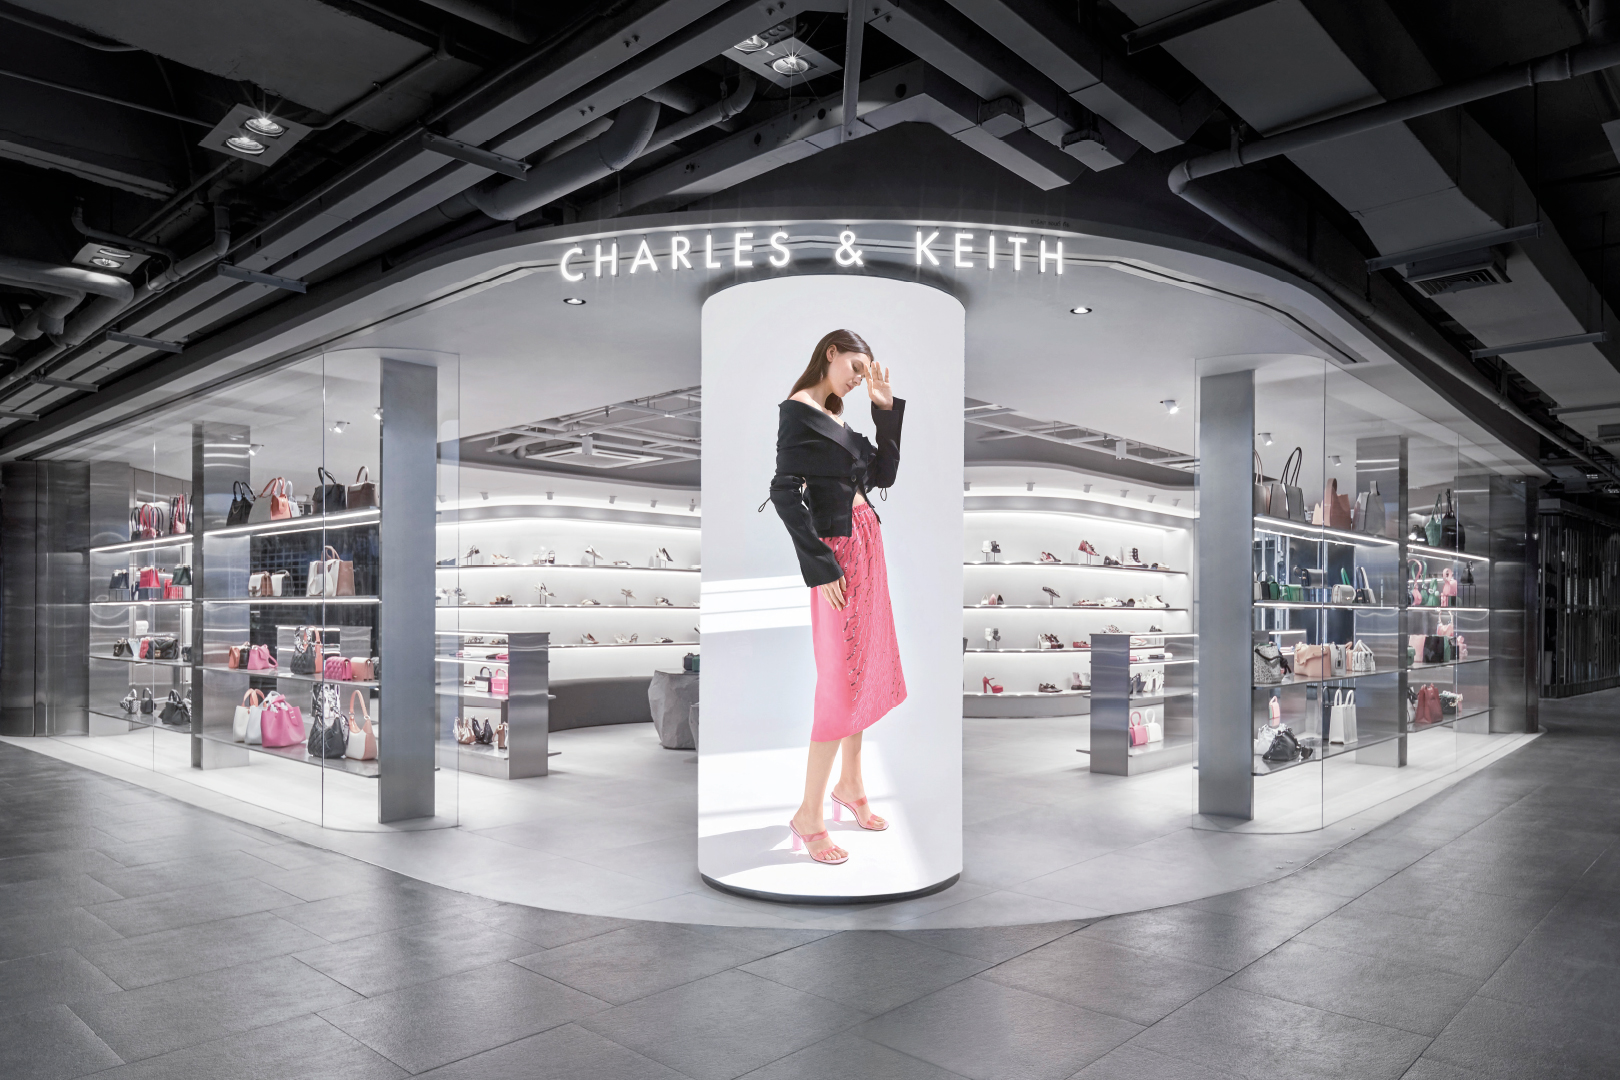 Siam Square, Bangkok unveiled CHARLES & KEITH's refreshed boutique, featuring a new store concept and boasting the brand’s first ever circular LED wrapped column that sets the tone of the season and draws attention of passers-by.